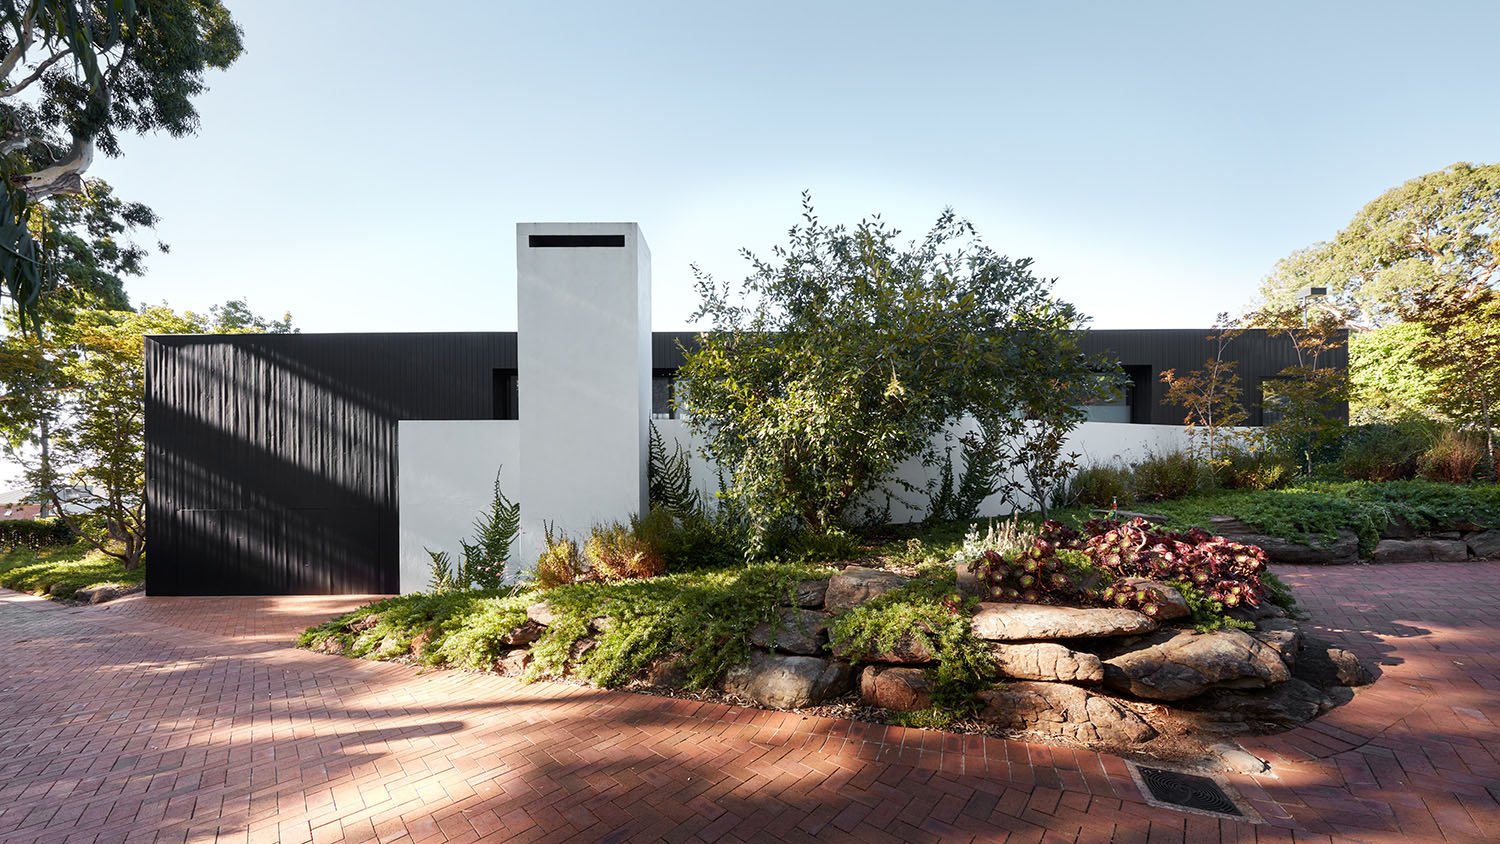 Mitcham-House-Contemporary-Black-Timber-Home-Landscaping 02.jpeg